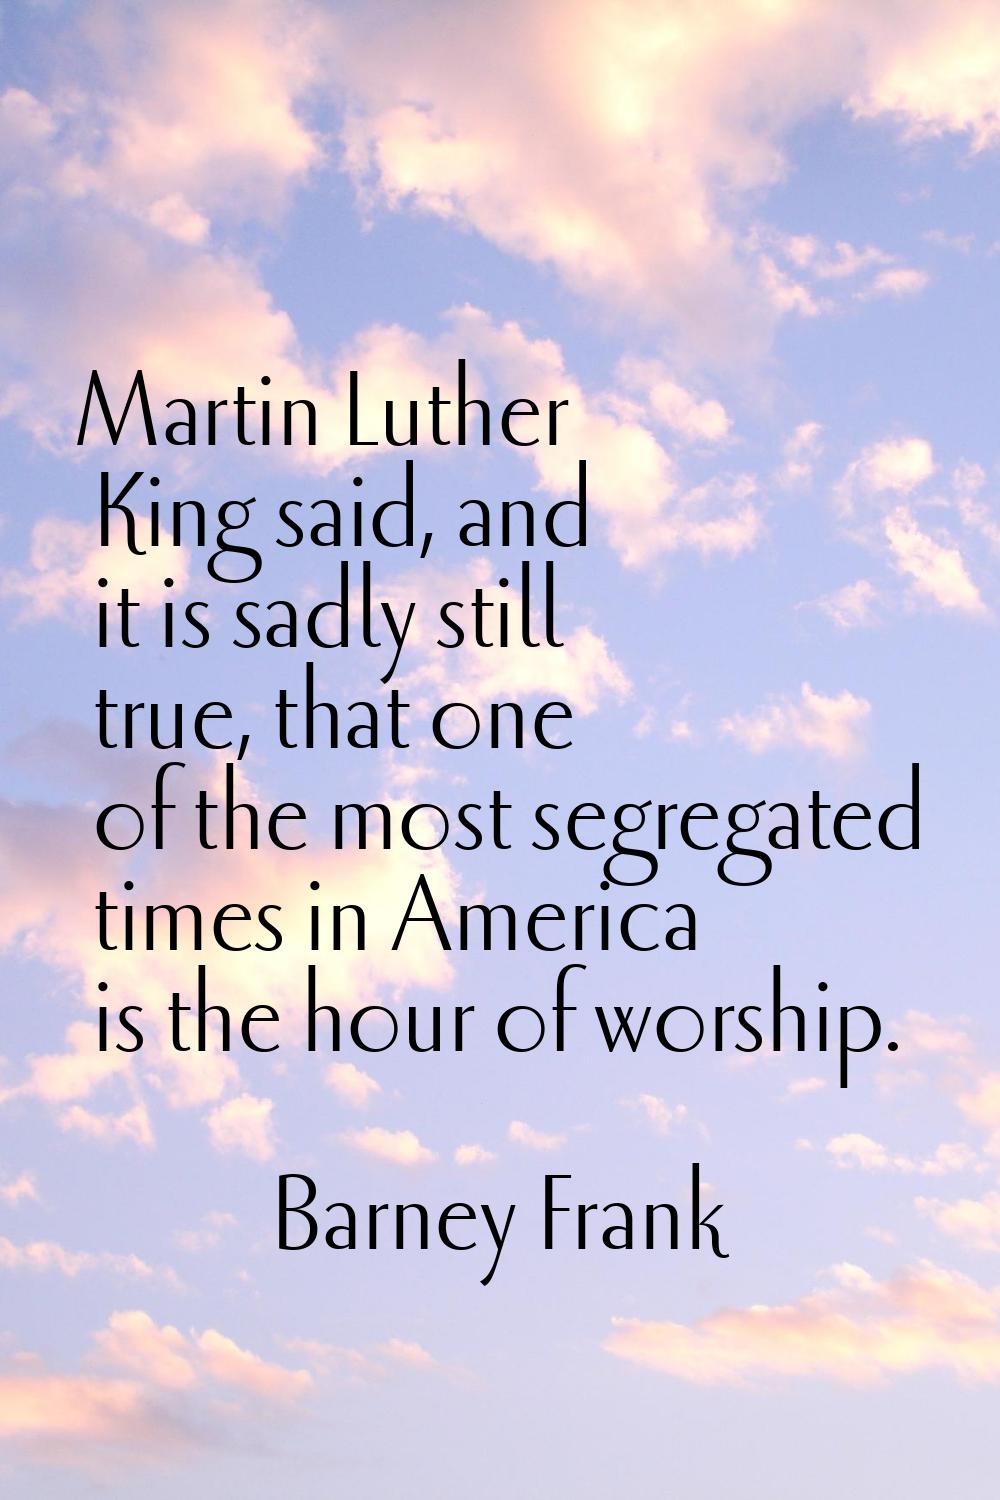 Martin Luther King said, and it is sadly still true, that one of the most segregated times in Ameri